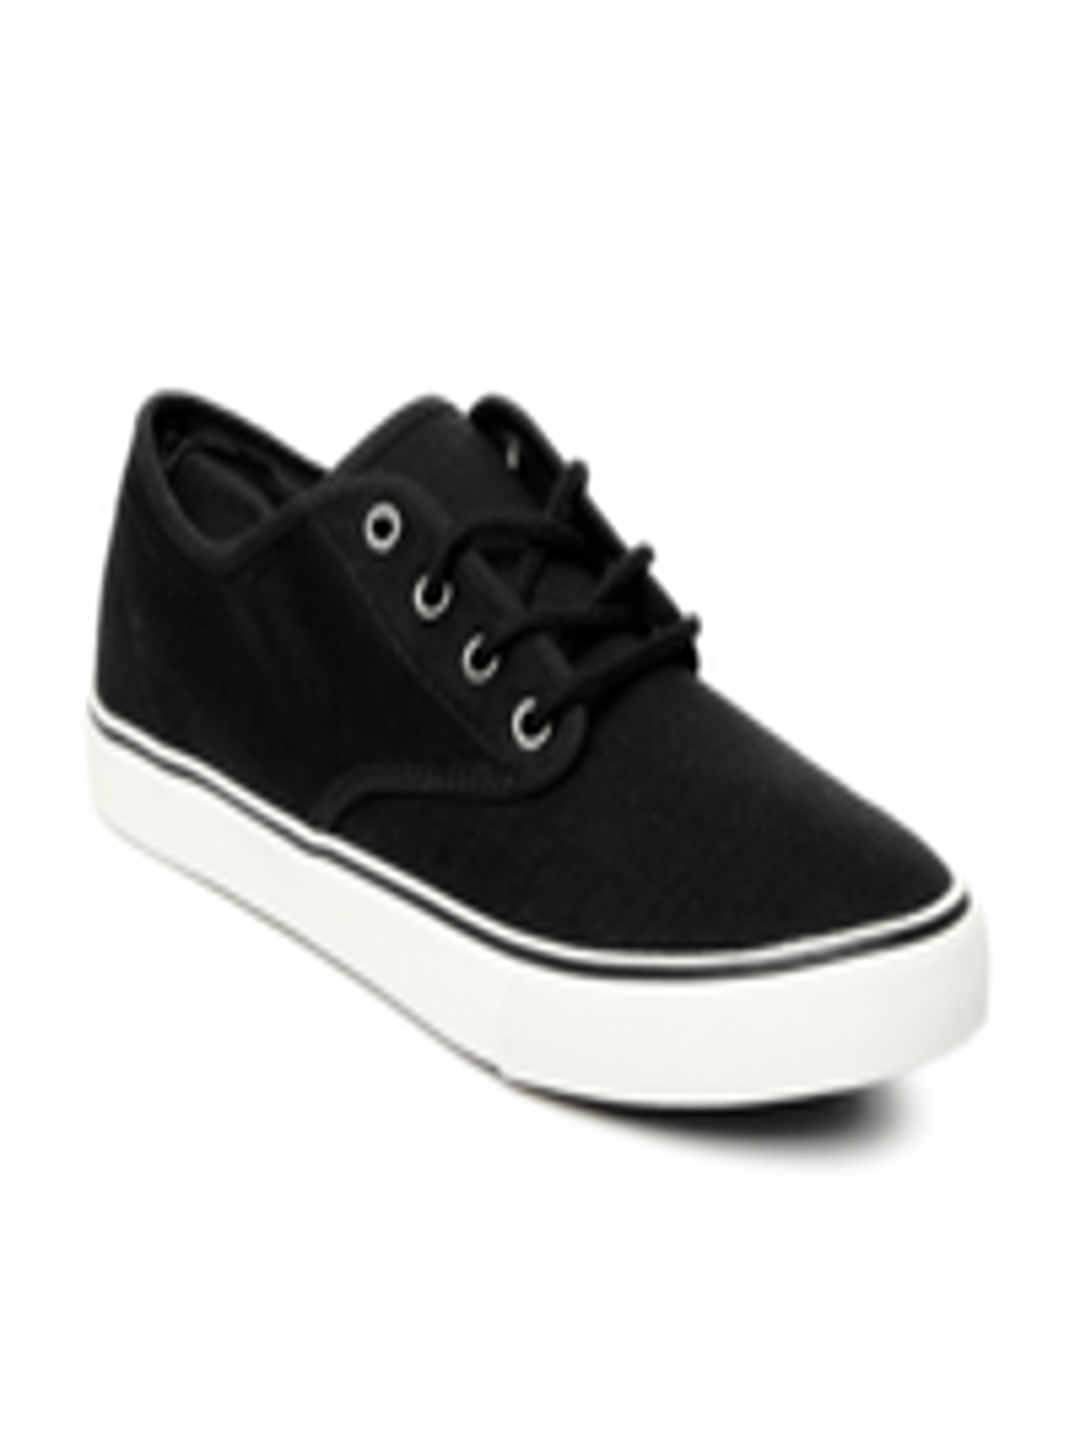 Buy Roadster Men Black Casual Shoes - Casual Shoes for Men 391477 | Myntra